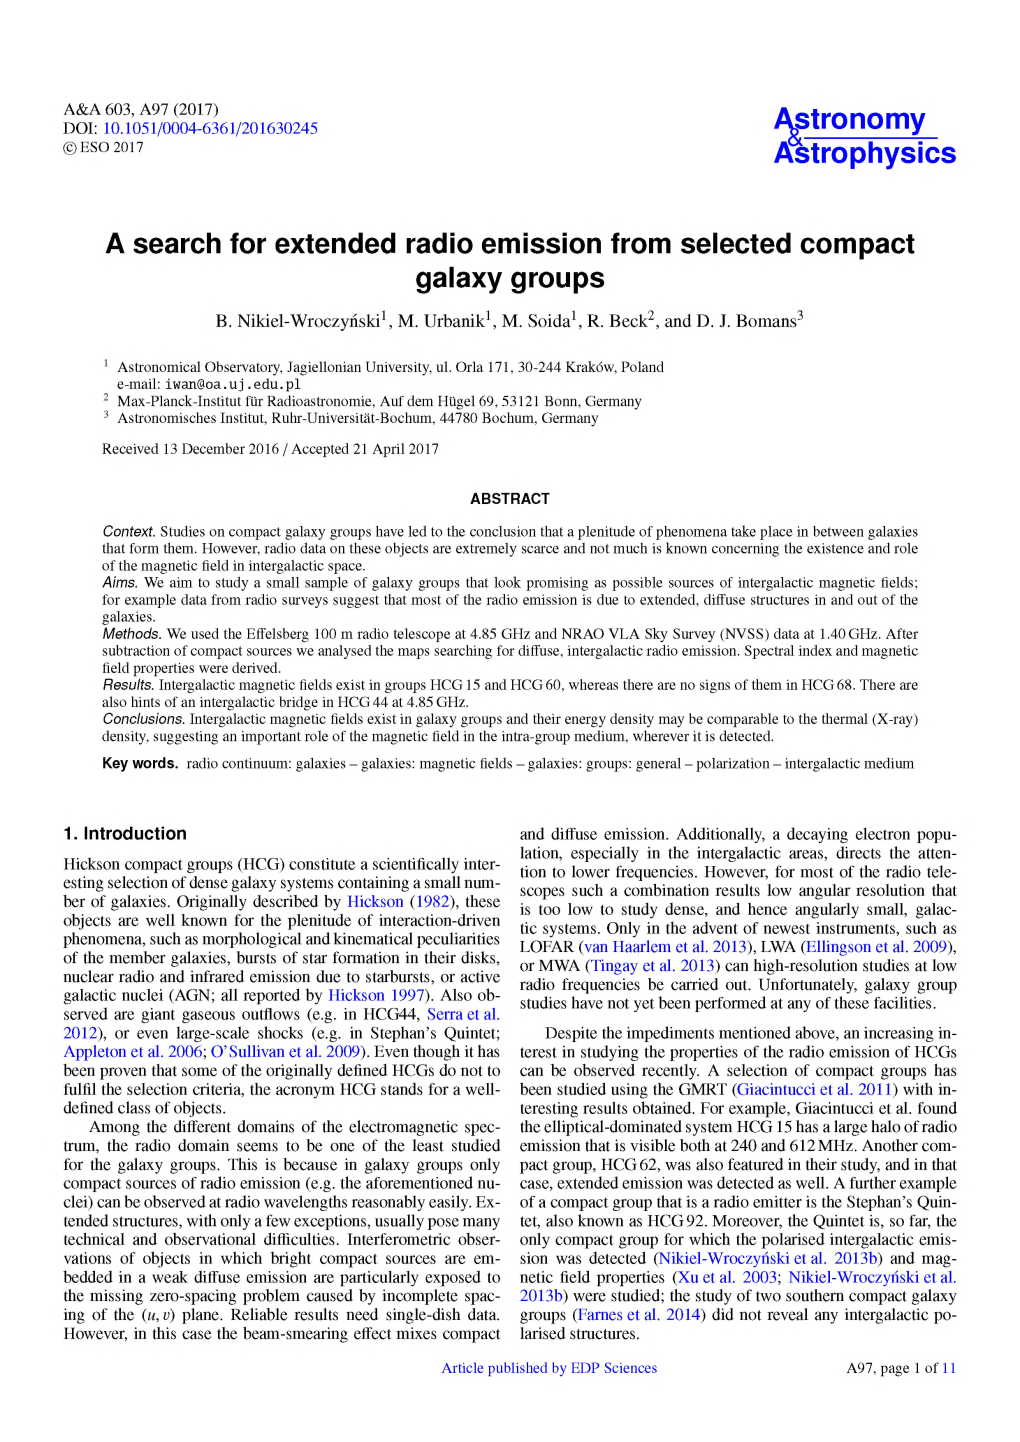 A Search for Extended Radio Emission from Selected Compact Galaxy Groups